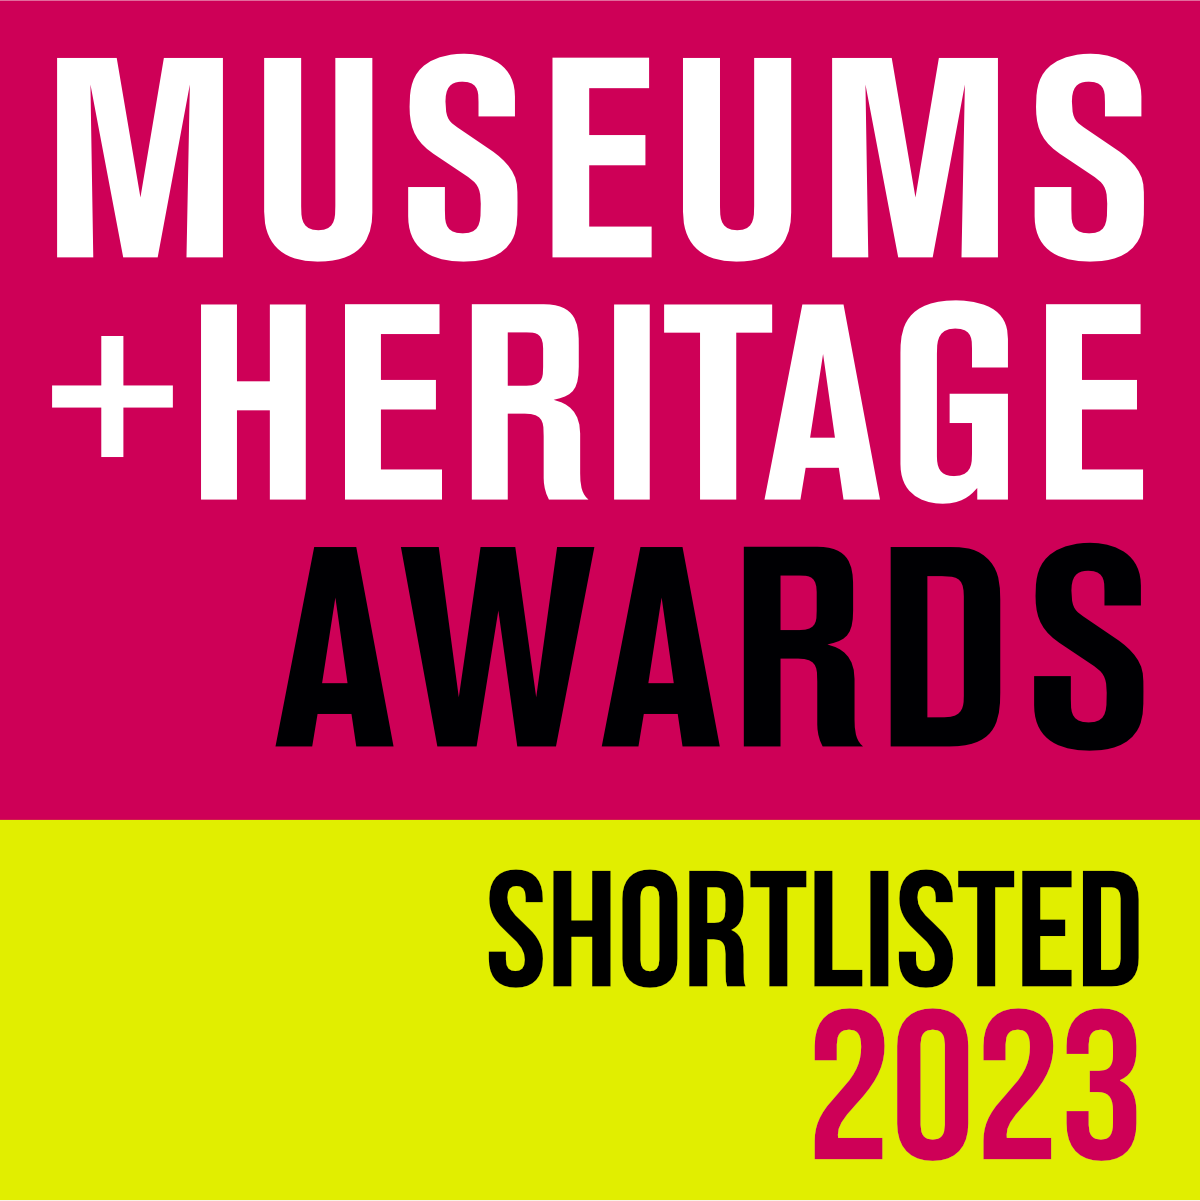 Museums and heritage awards shortlisted 2023